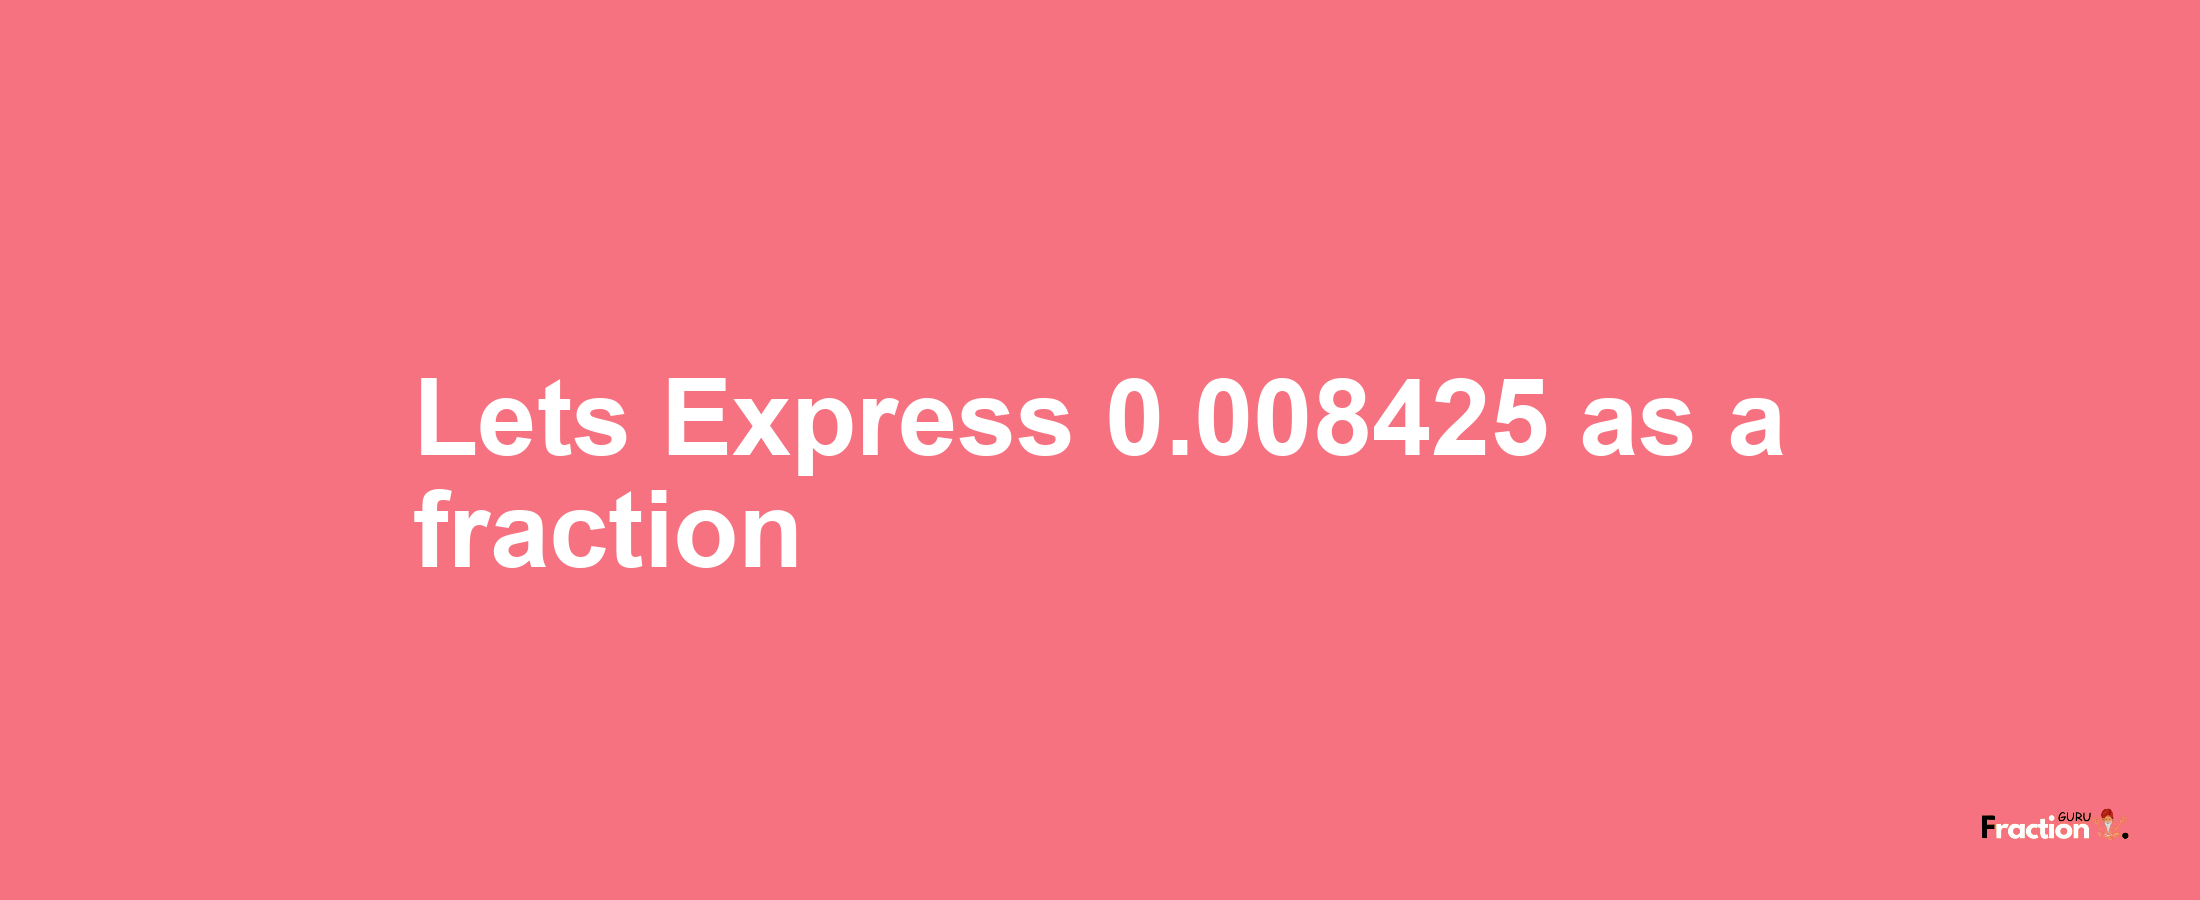 Lets Express 0.008425 as afraction